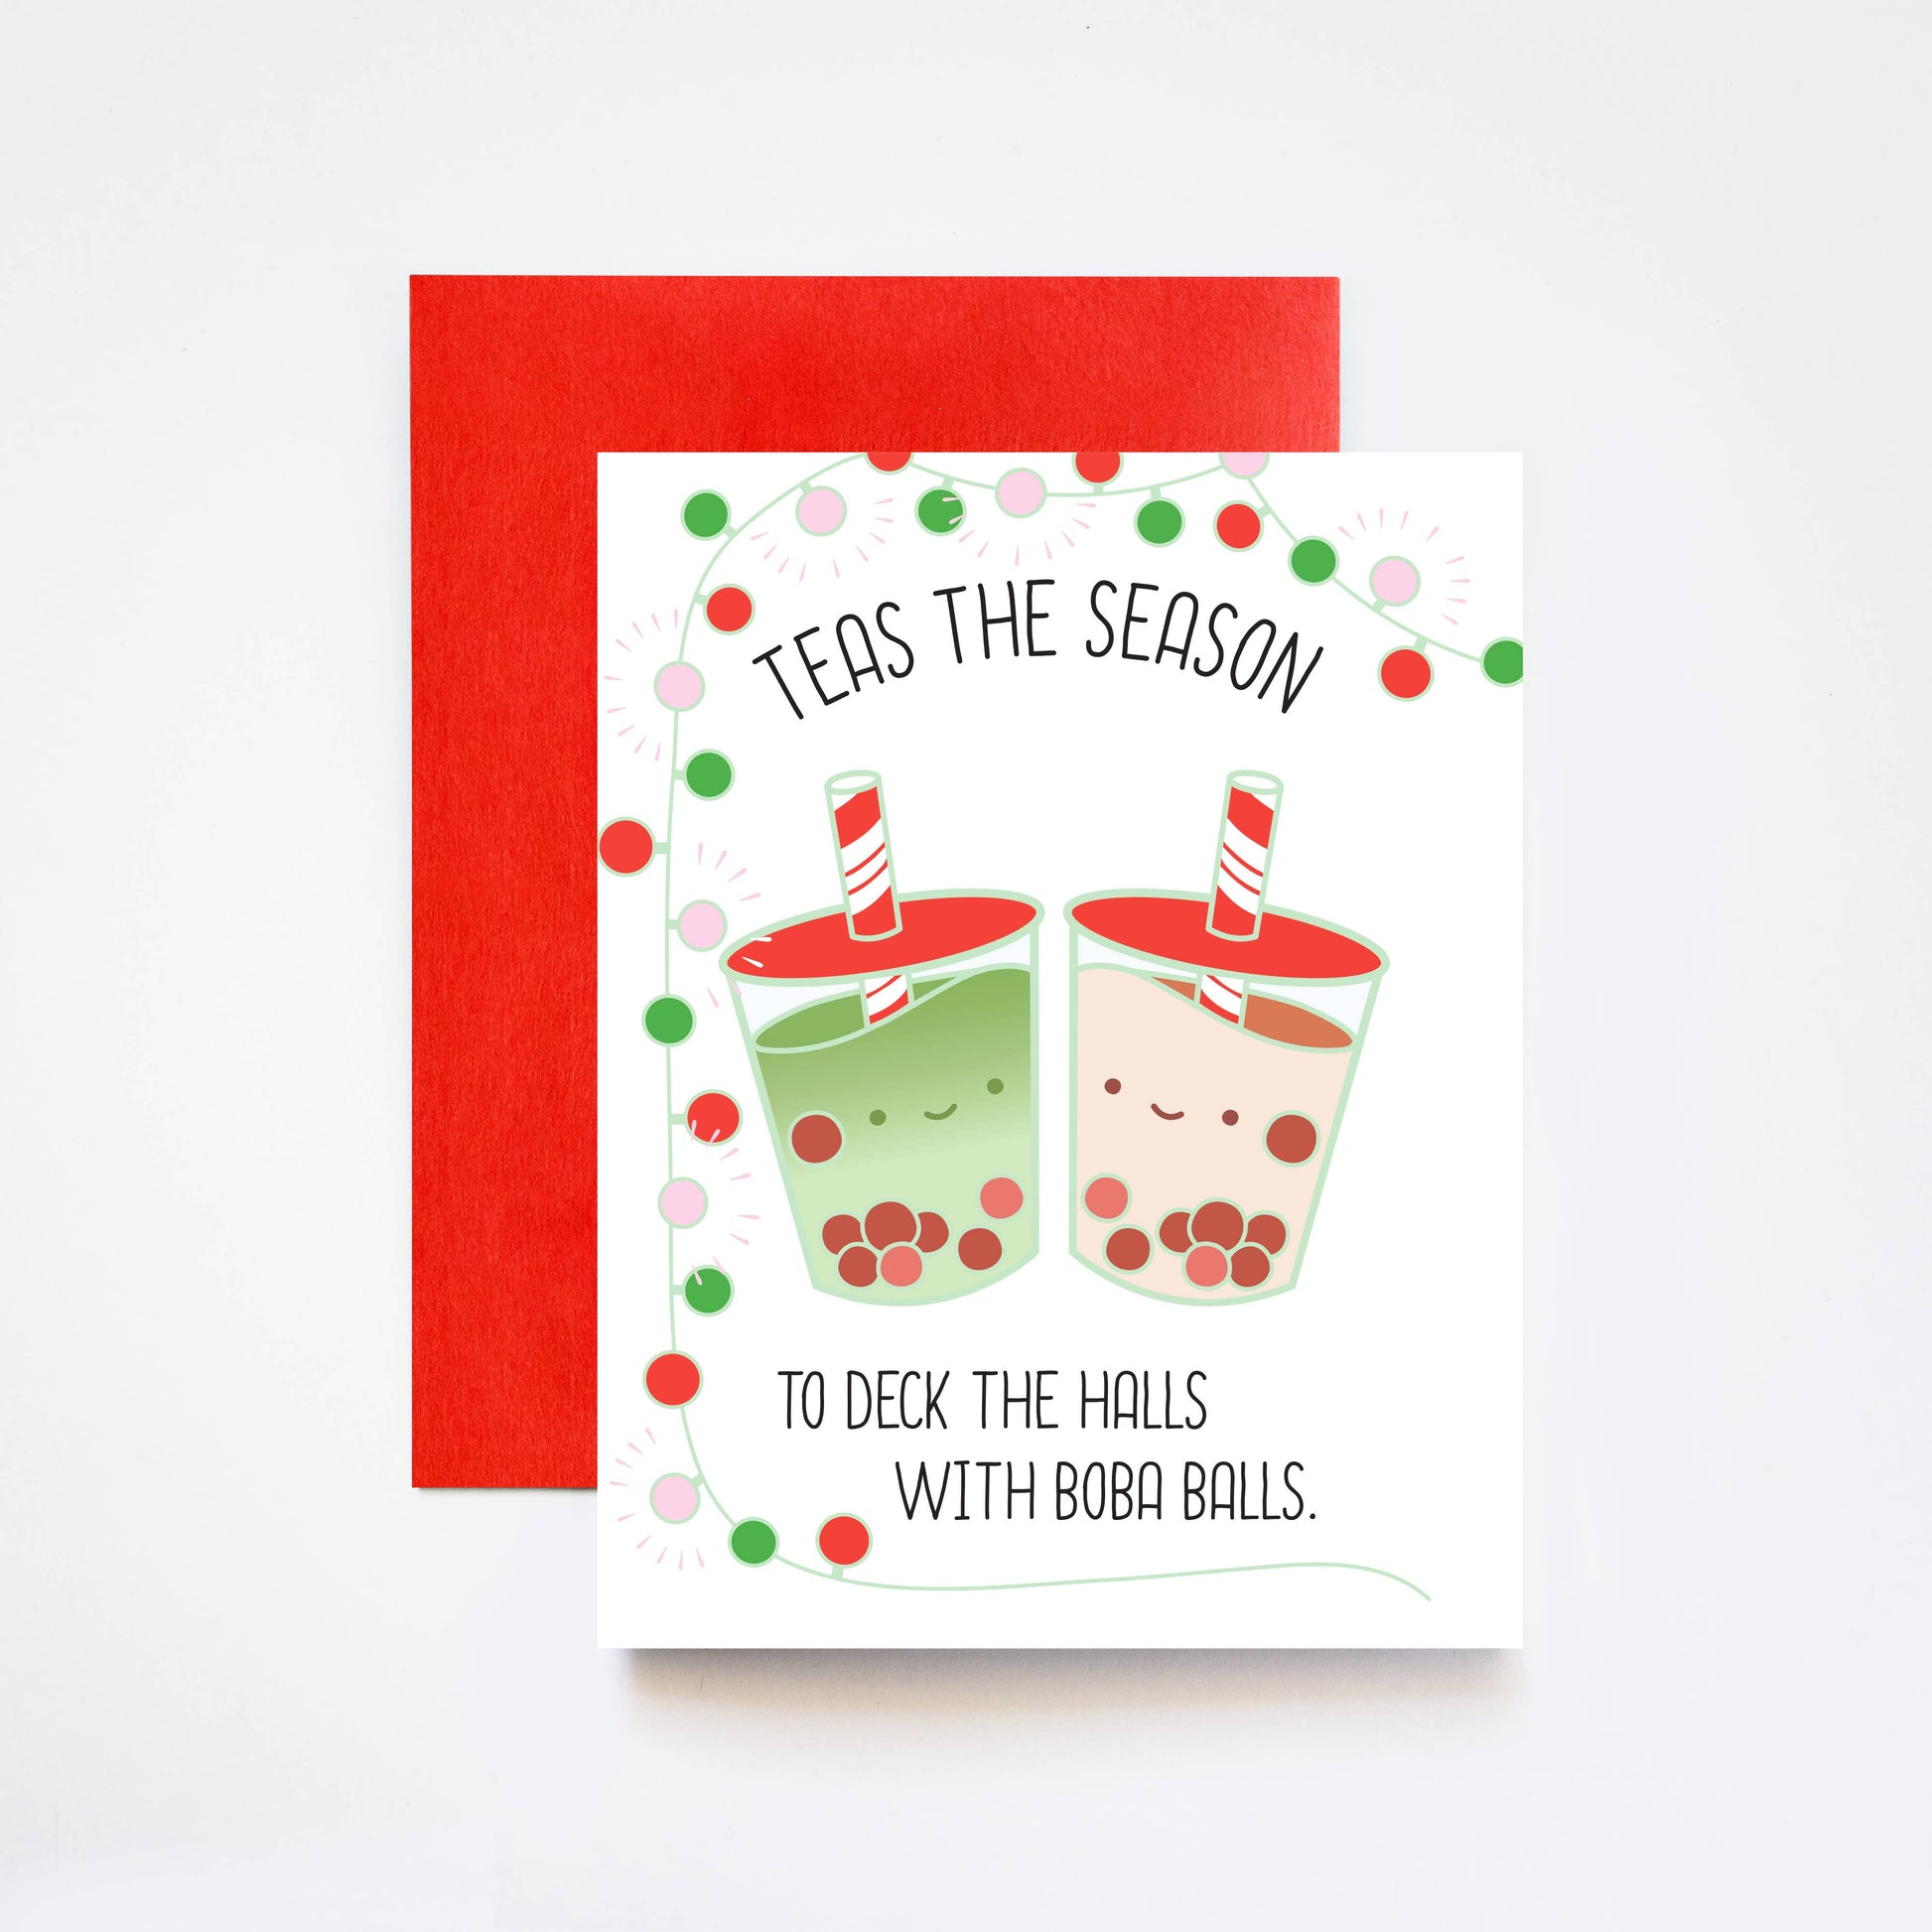 Boba tea holiday card that reads "Teas the Season to Deck the Halls with Boba Balls." 